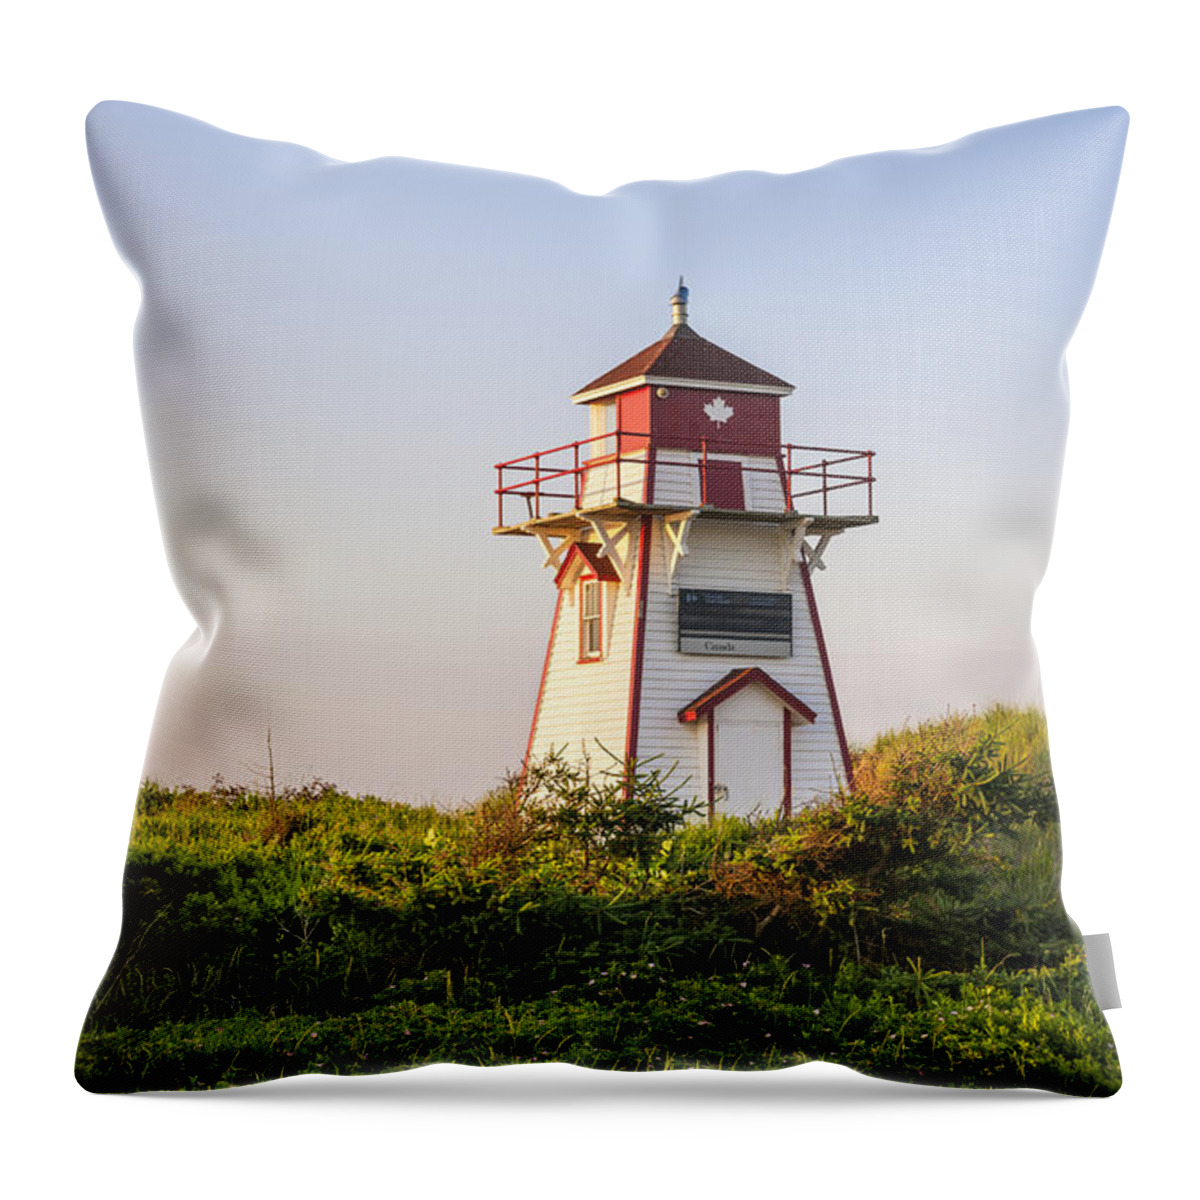 Lighthouse Throw Pillow featuring the photograph Covehead Harbour Lighthouse 1 by Elena Elisseeva